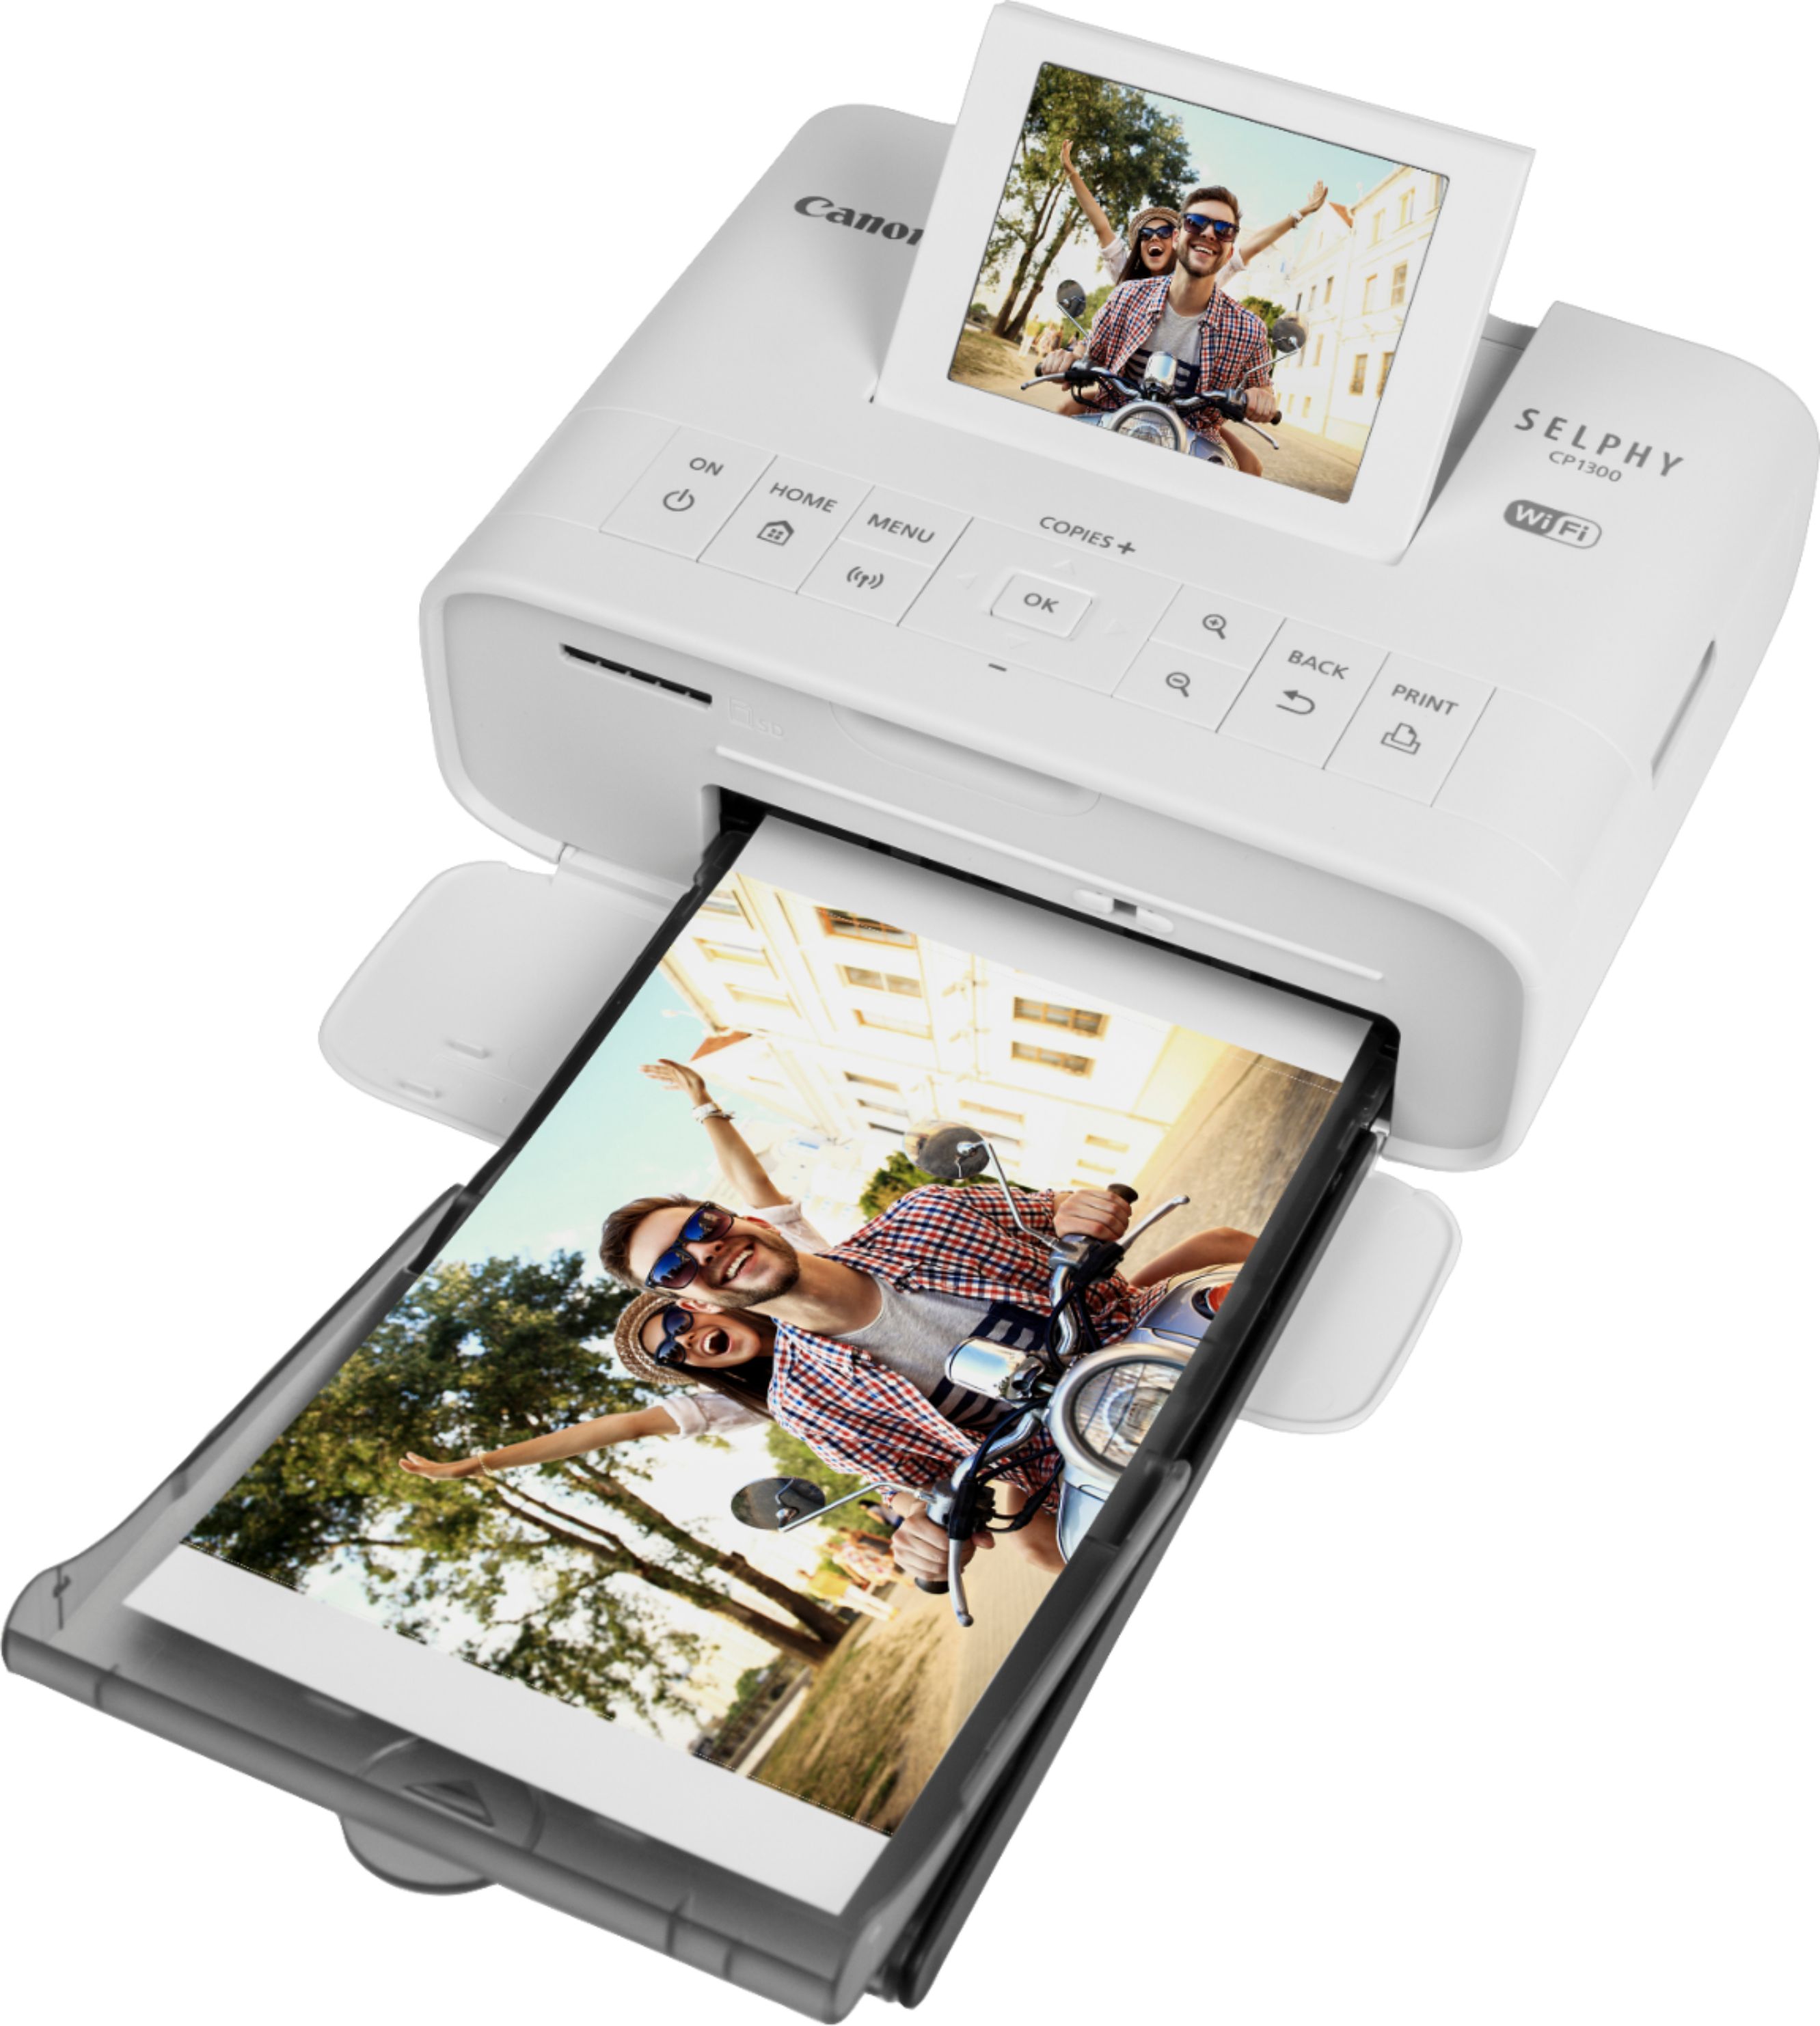  Canon SELPHY CP1300 Wireless Portable Photo Printer with Color  Ink & 108 Paper Sheets Set, USB Cable & Cleaning Cloth - Inkjet Laser 4x6  Label, Air Print app, LCD Screen